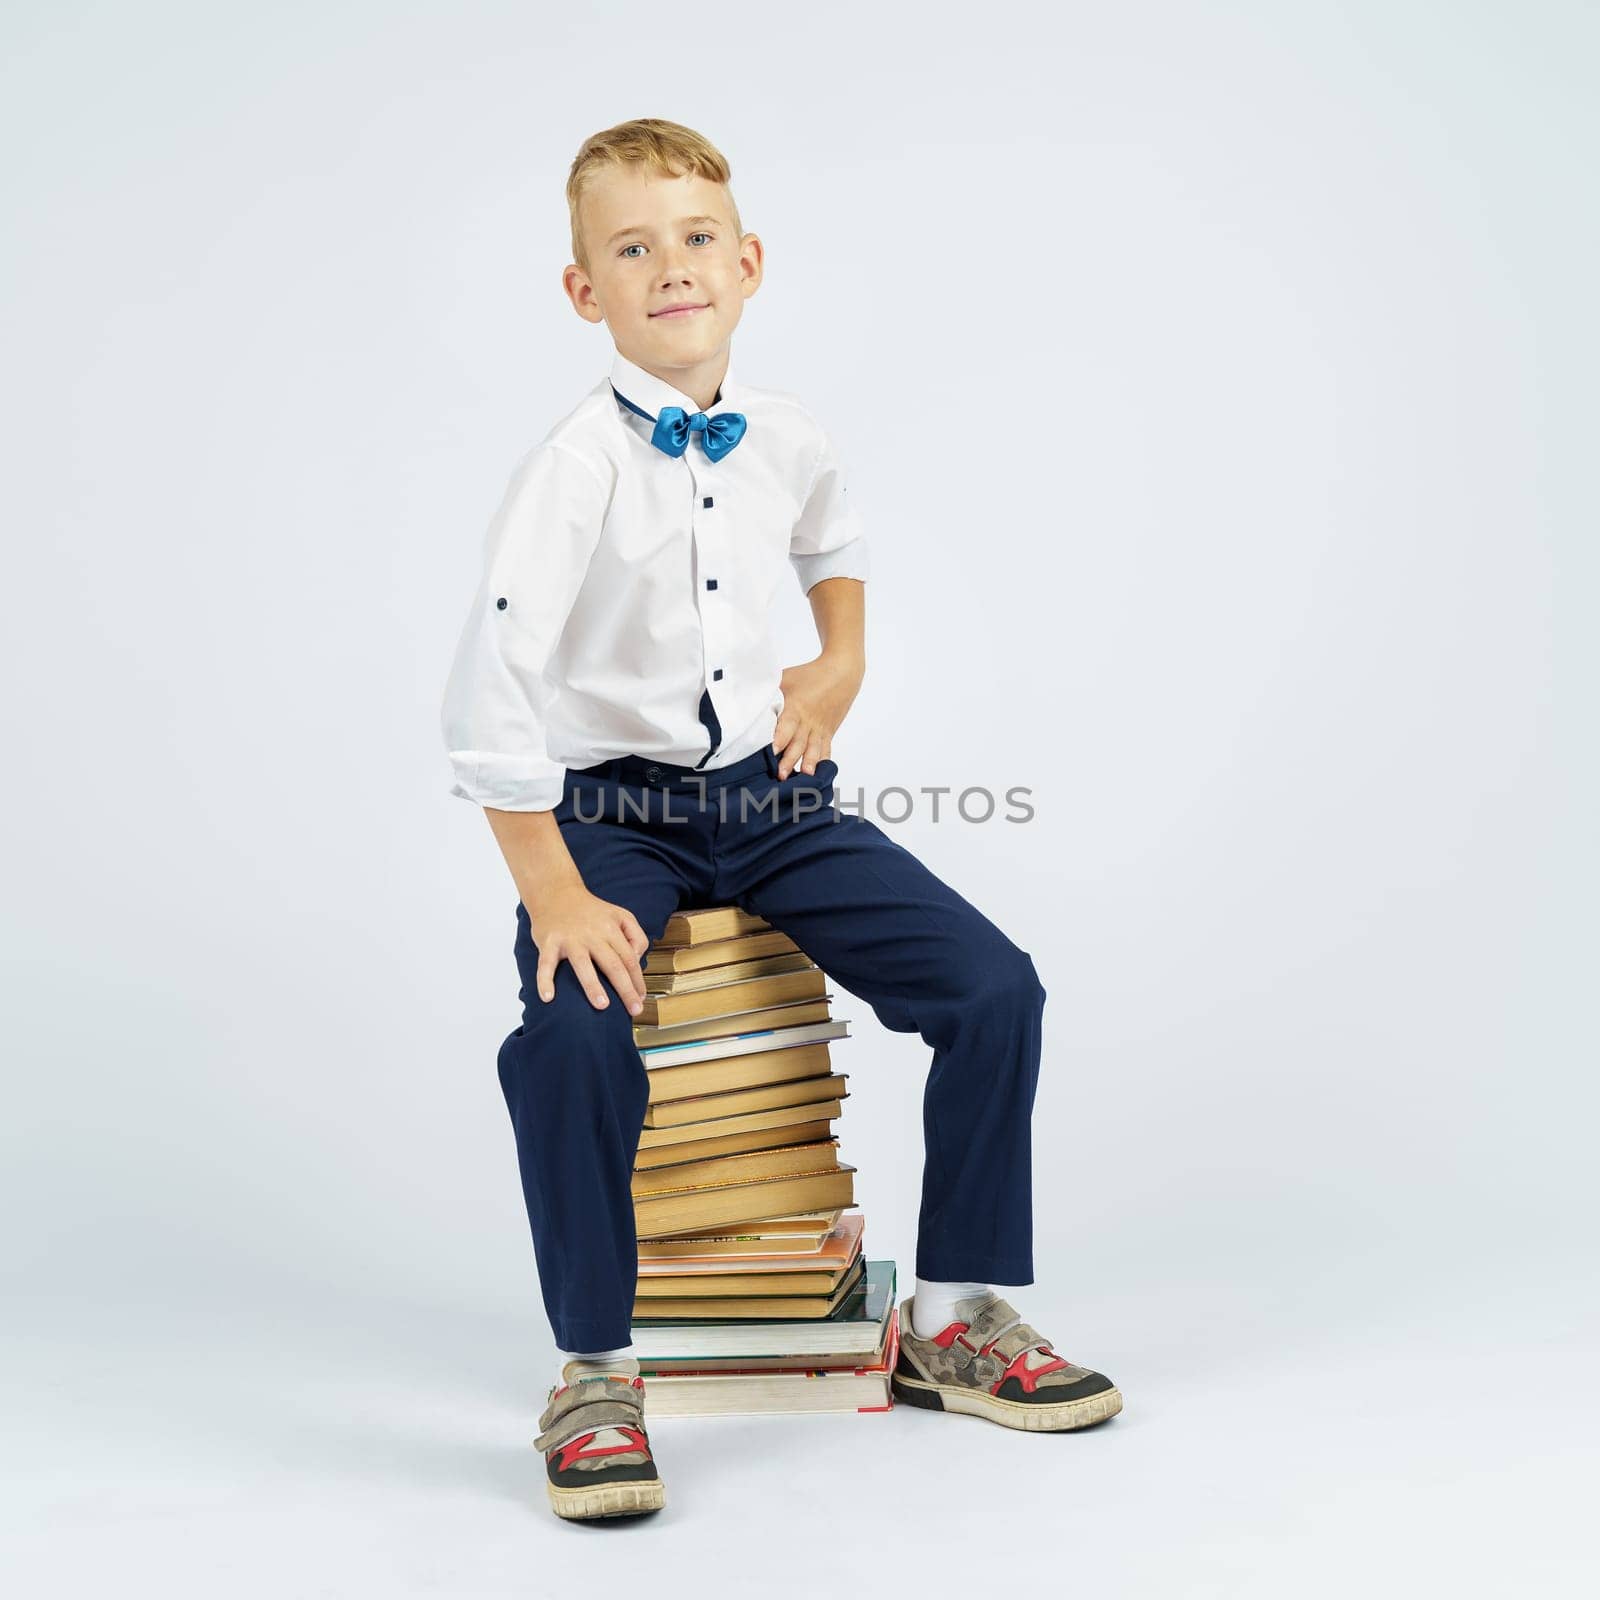 The schoolboy is sitting on books. Isolated background. Education concept by Sd28DimoN_1976